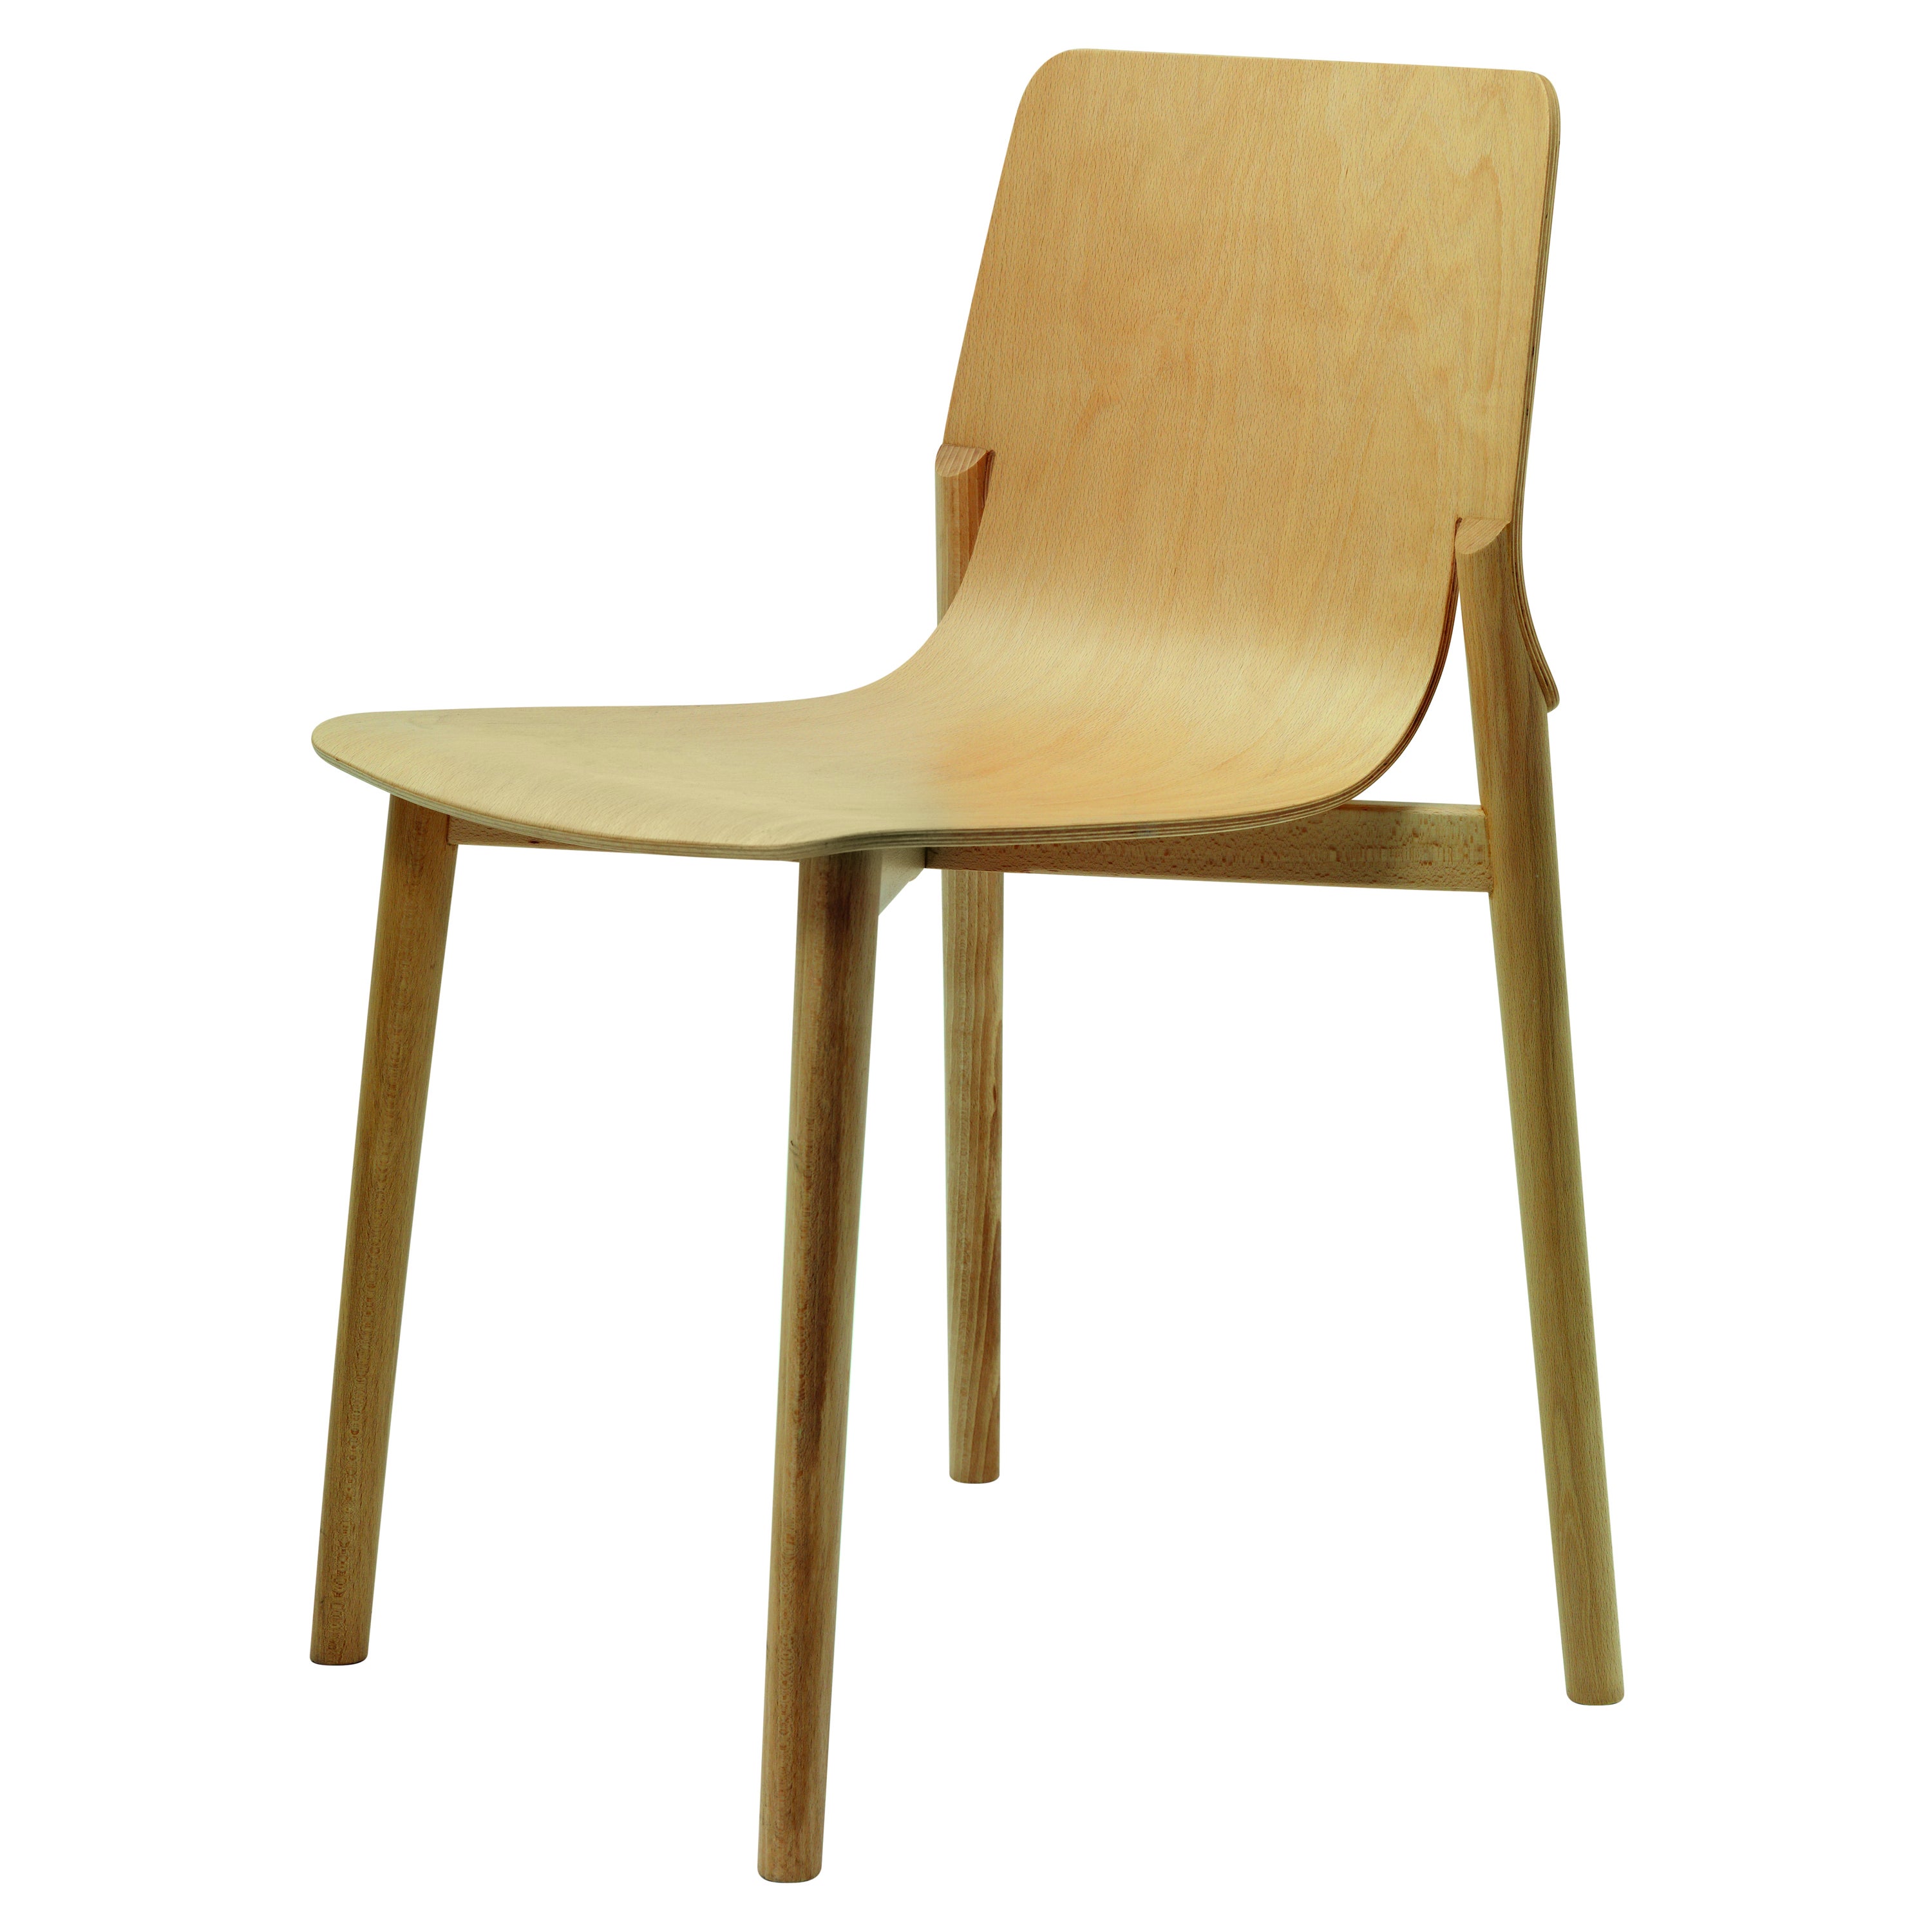 Alias 047 Kayak Chair in Natural Oak Seat and Frame by Patrick Norguet For Sale